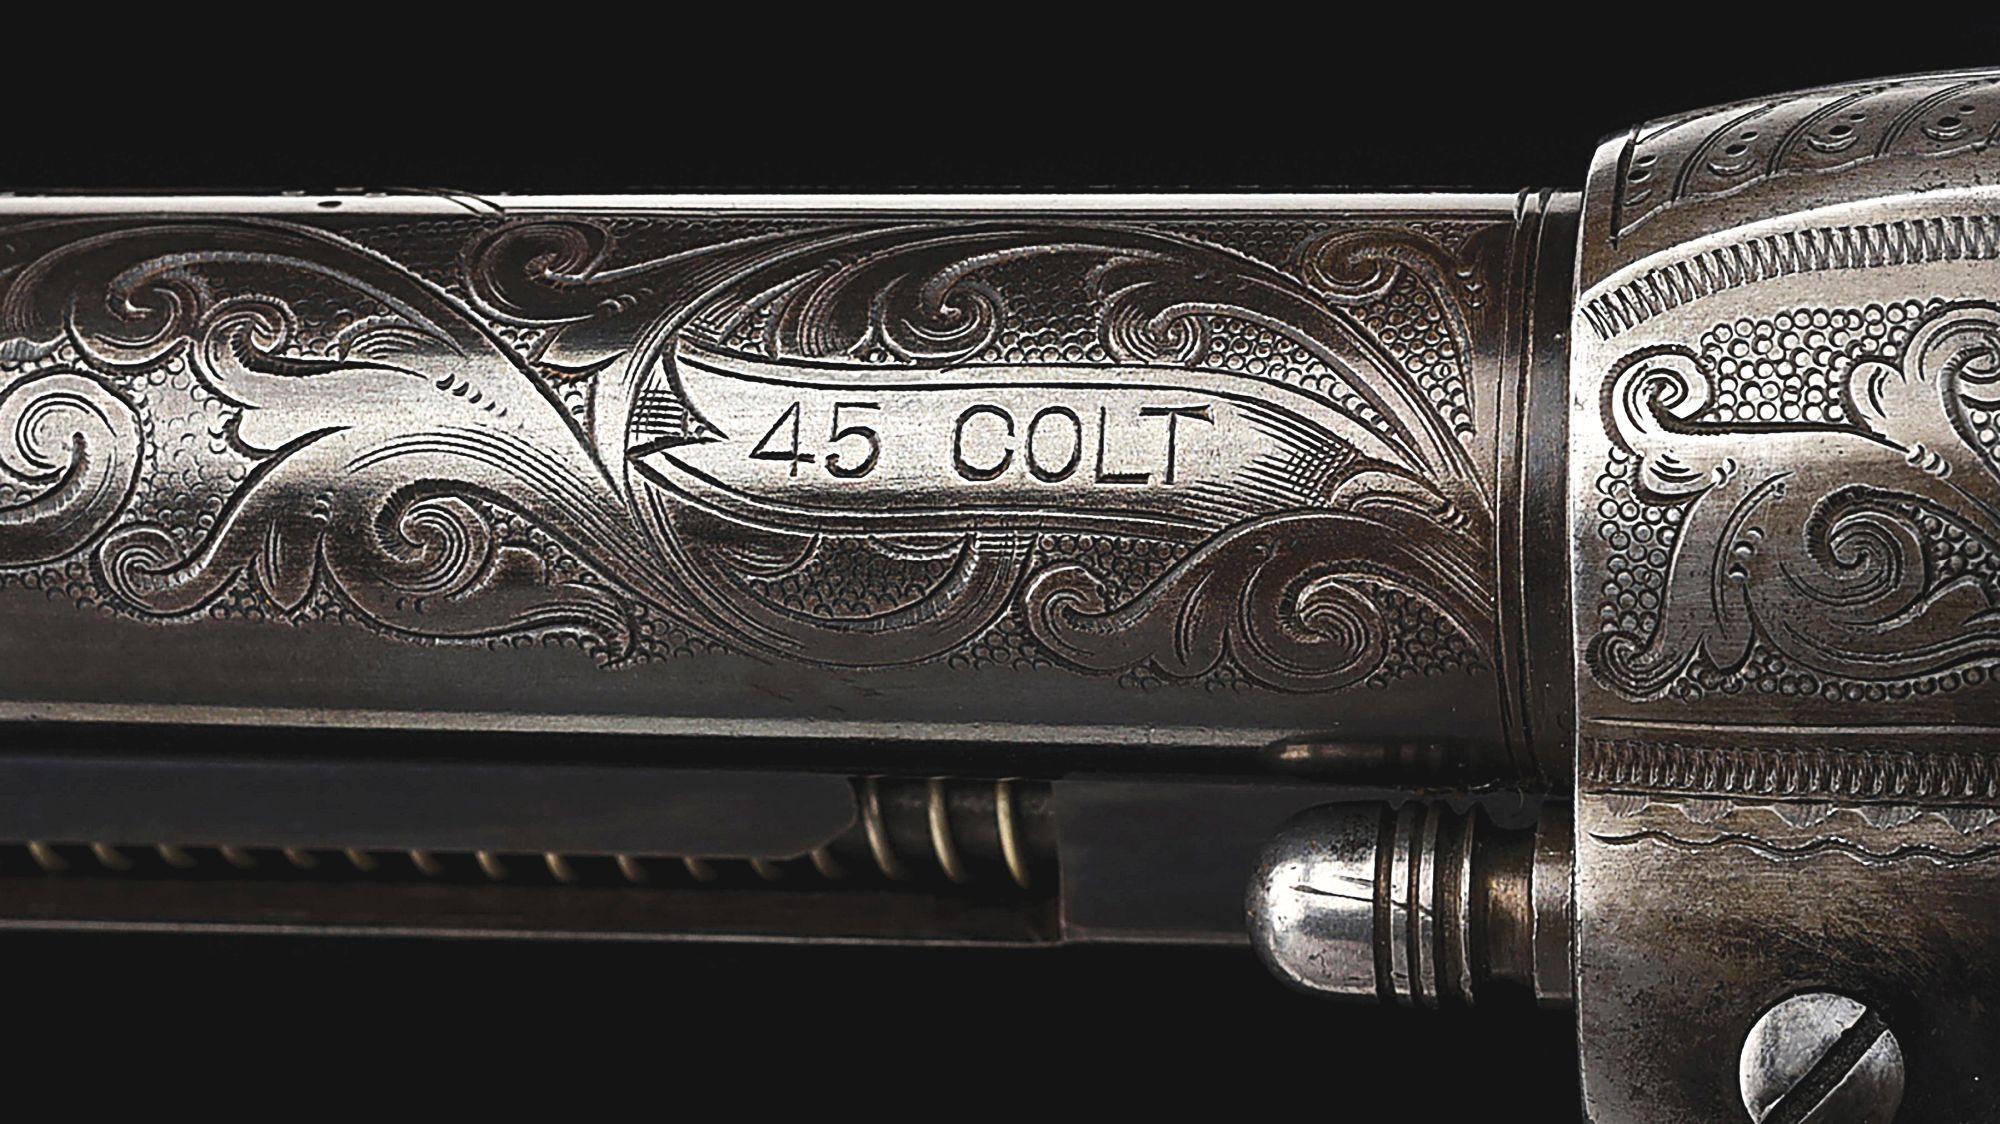 (C) FACTORY ENGRAVED COLT SINGLE ACTION ARMY REVOLVER SHIPPED TO ST. LOUIS.